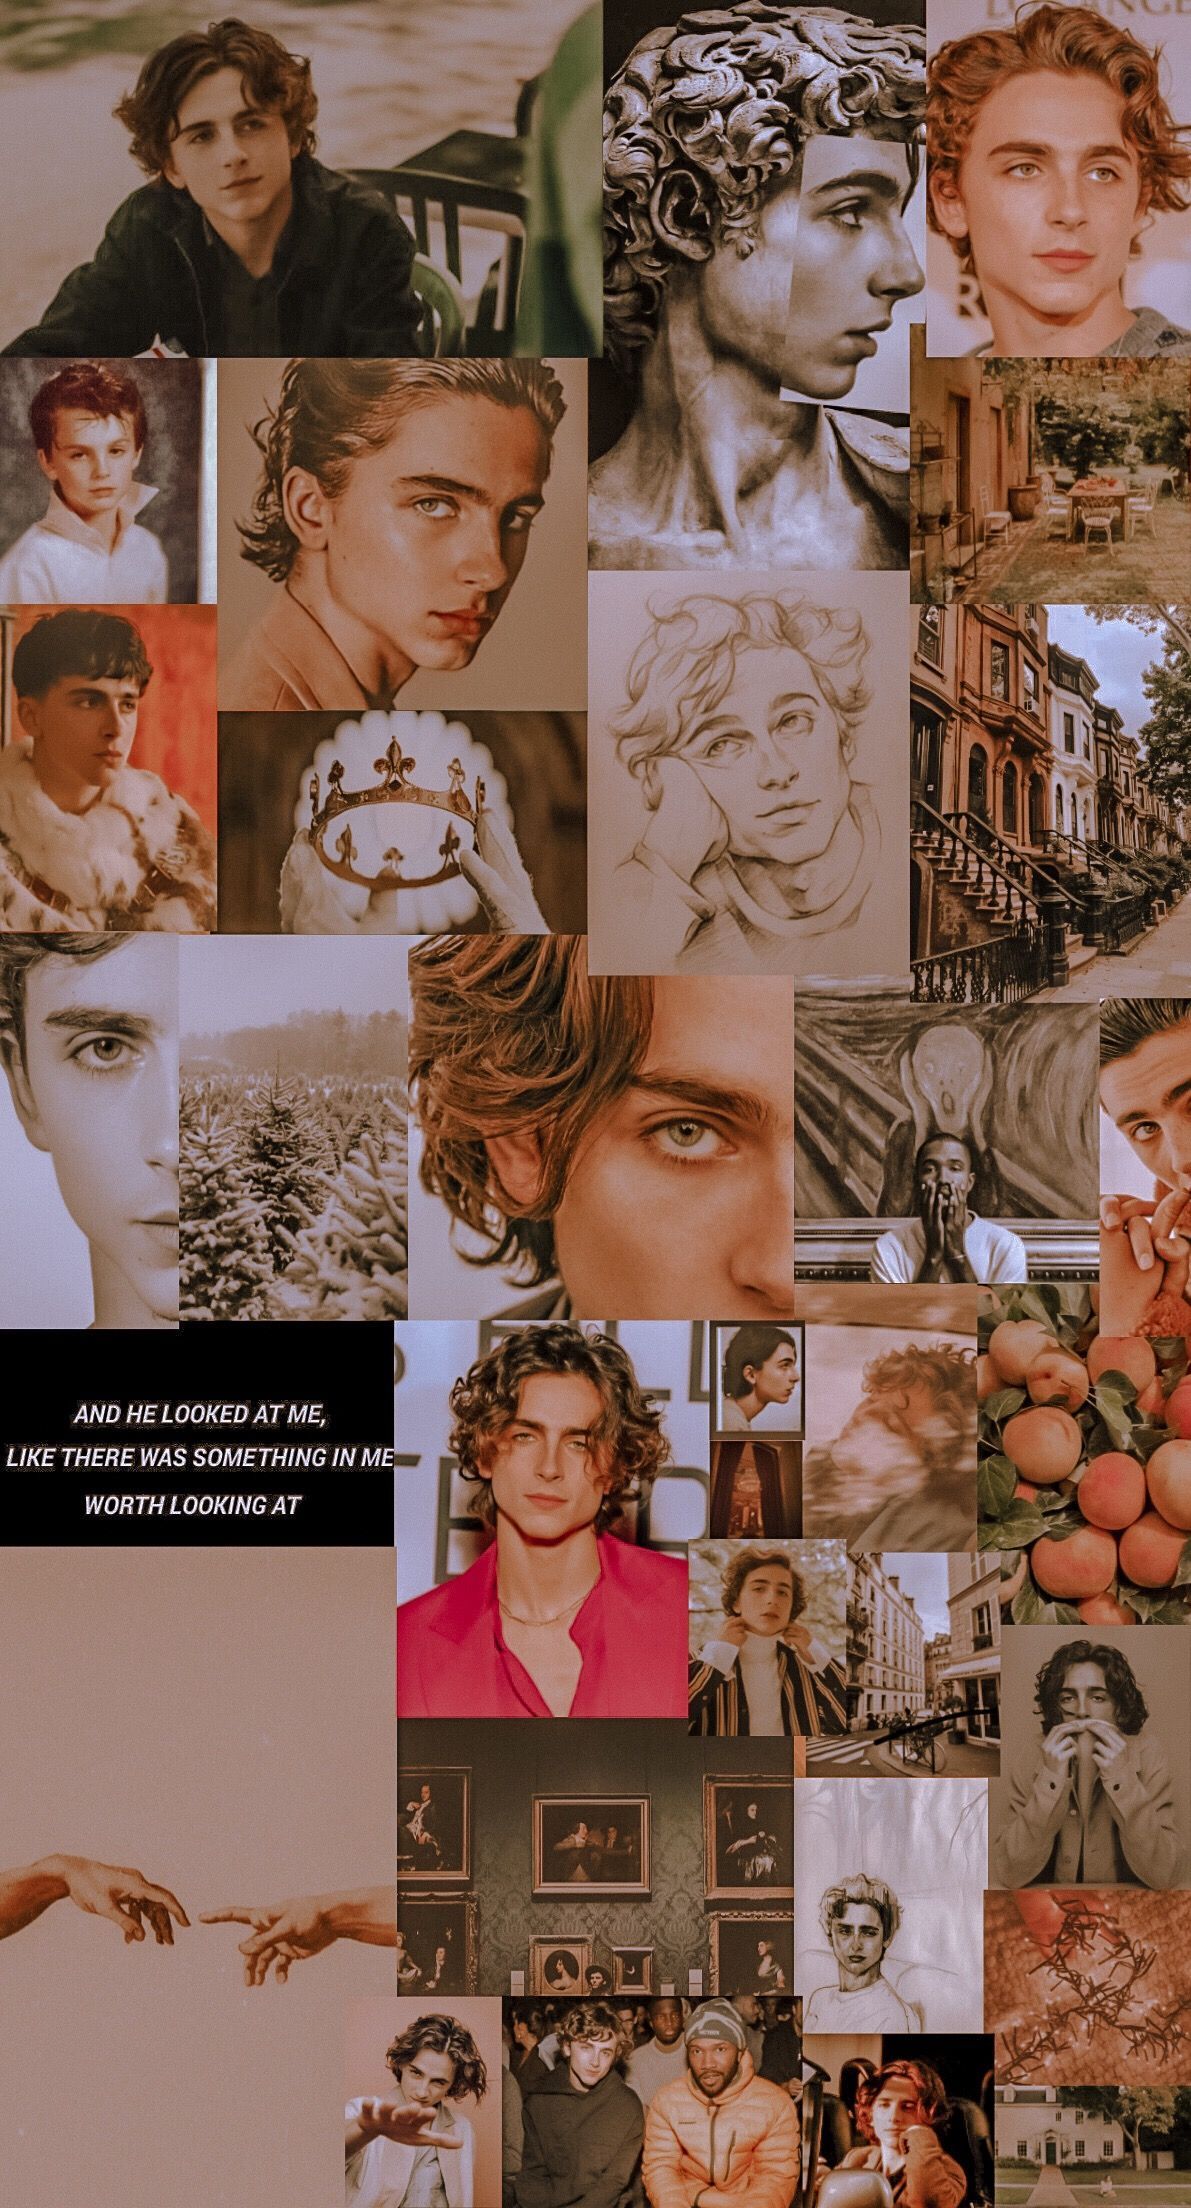 its timothee chalamet's 24th bday today so I made a collage dedicated to him !!